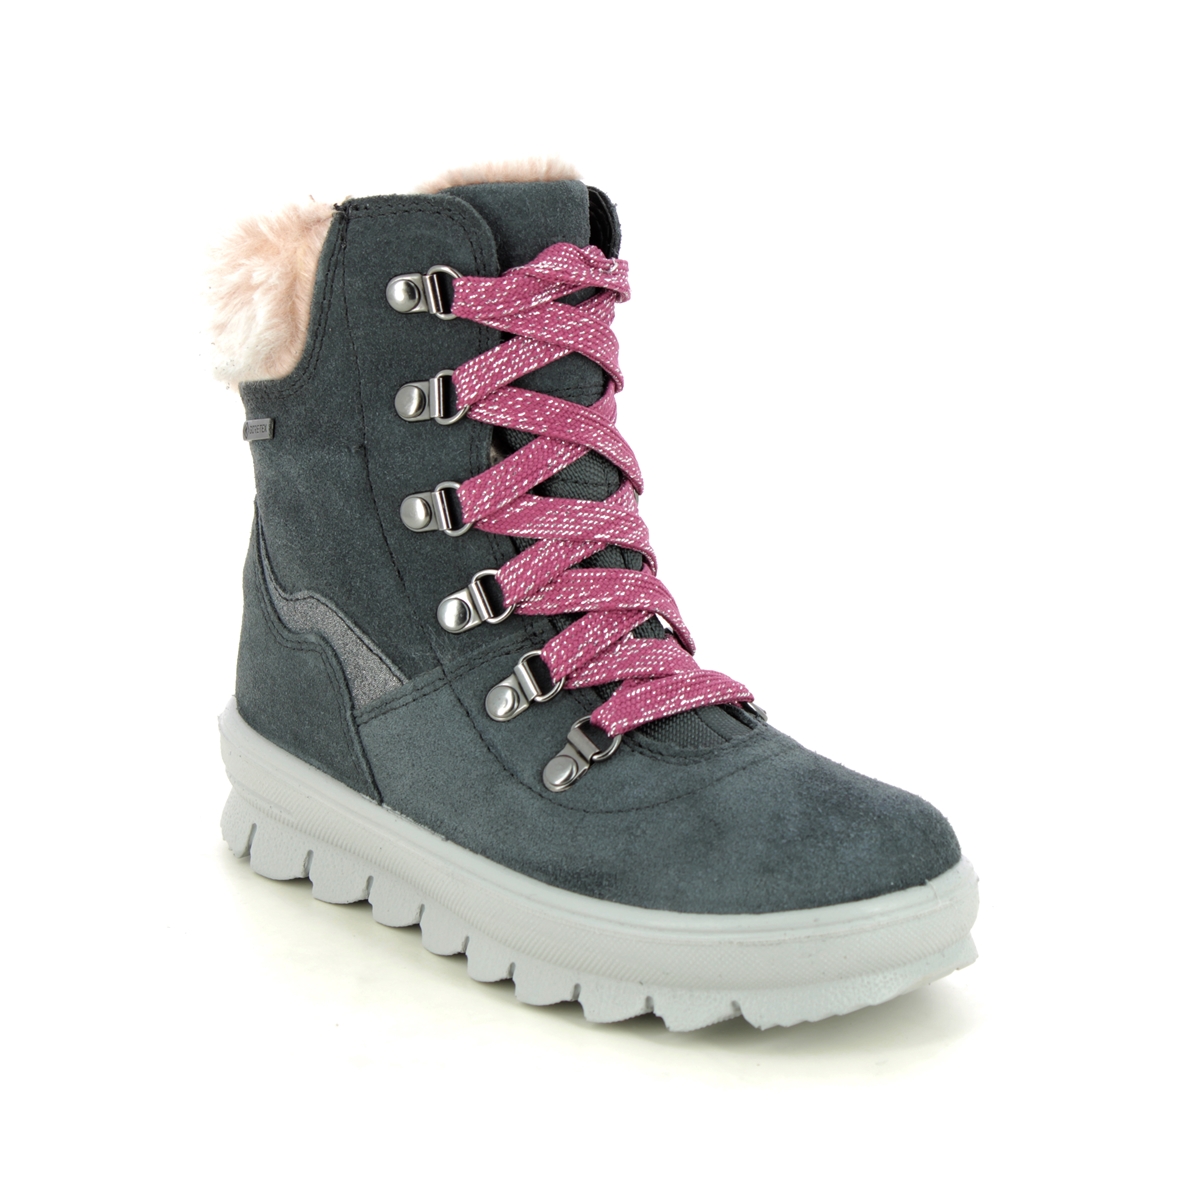 Superfit Flavia Lace Gtx Grey Suede Kids Girls boots 1000220-2000 in a Plain Leather in Size 34